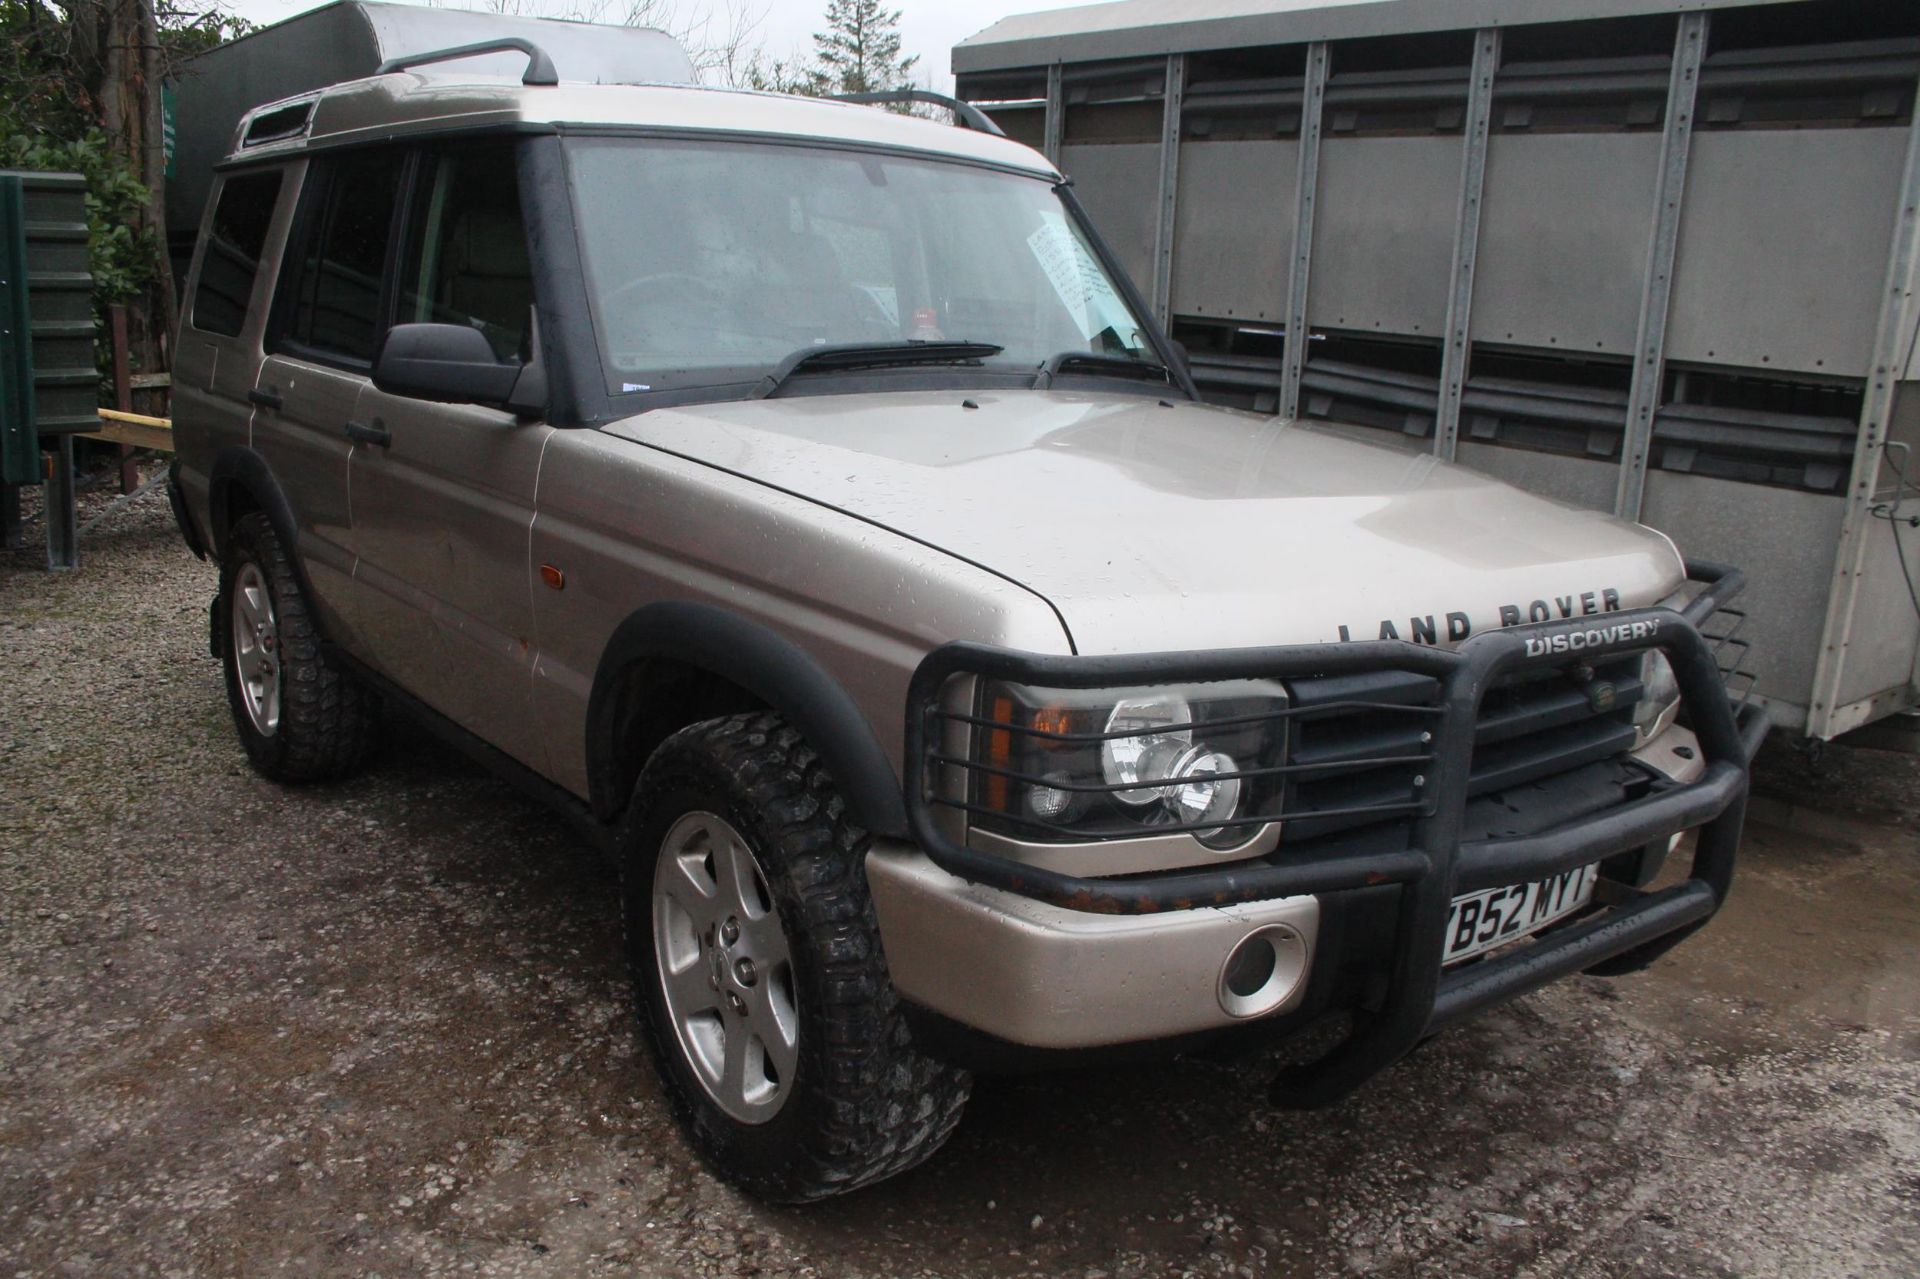 LAND ROVER DISCOVERY 2 YB52MYT MANUAL DIESEL APPROX 158000 MILES FIRST REG 2002 PART SERVICE HISTORY